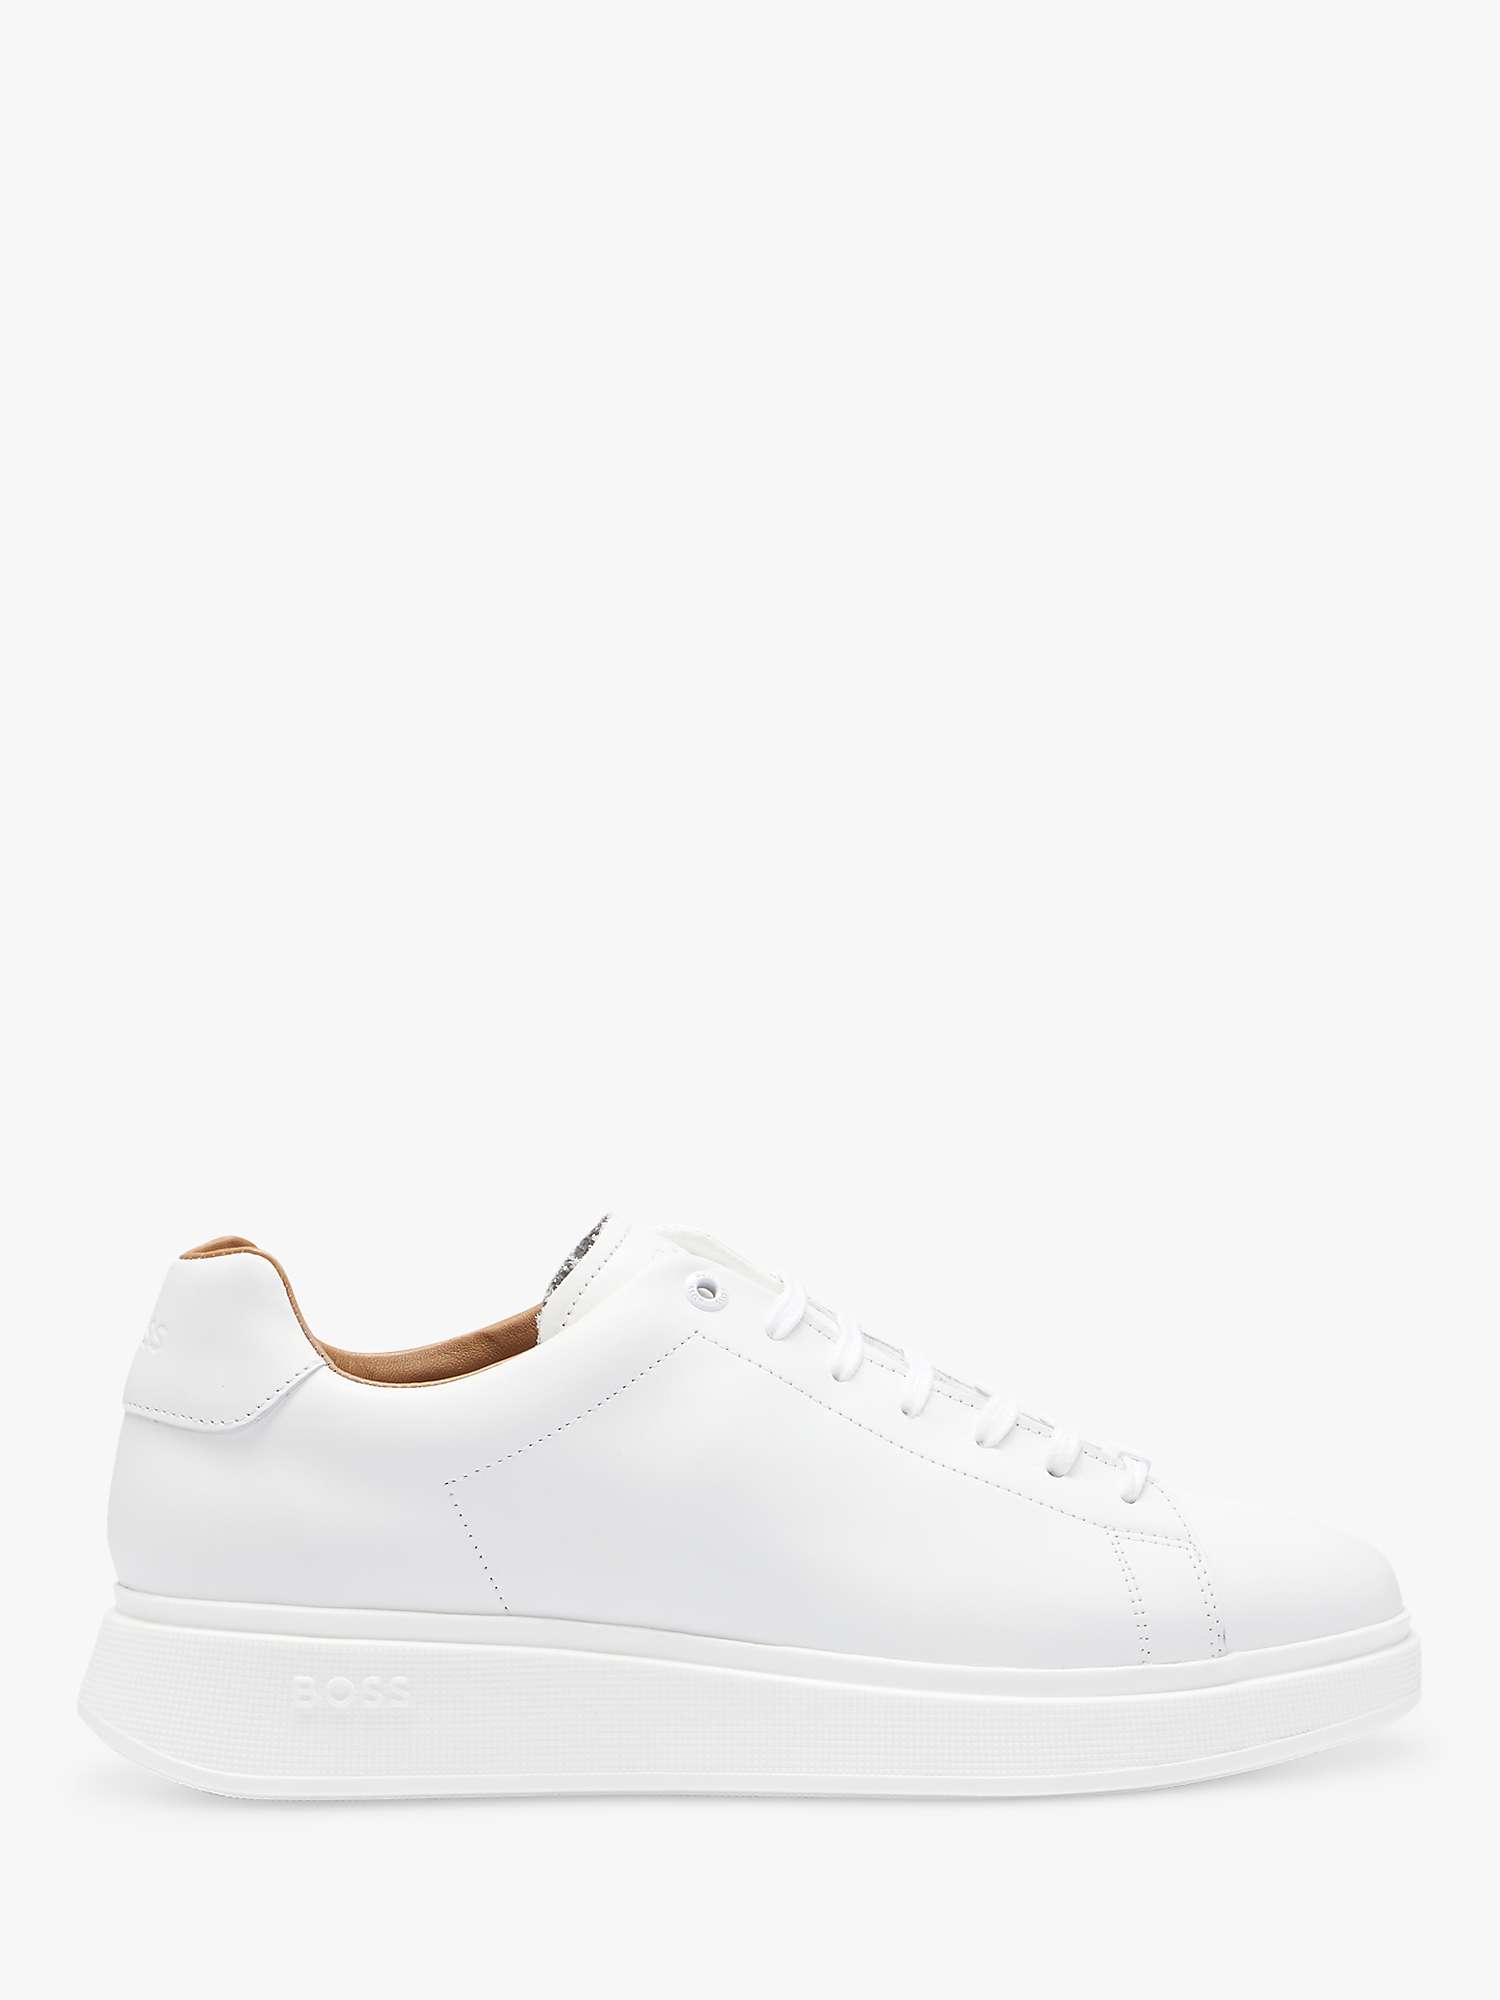 Buy HUGO BOSS Bulton 001 Lace Up Trainers Online at johnlewis.com